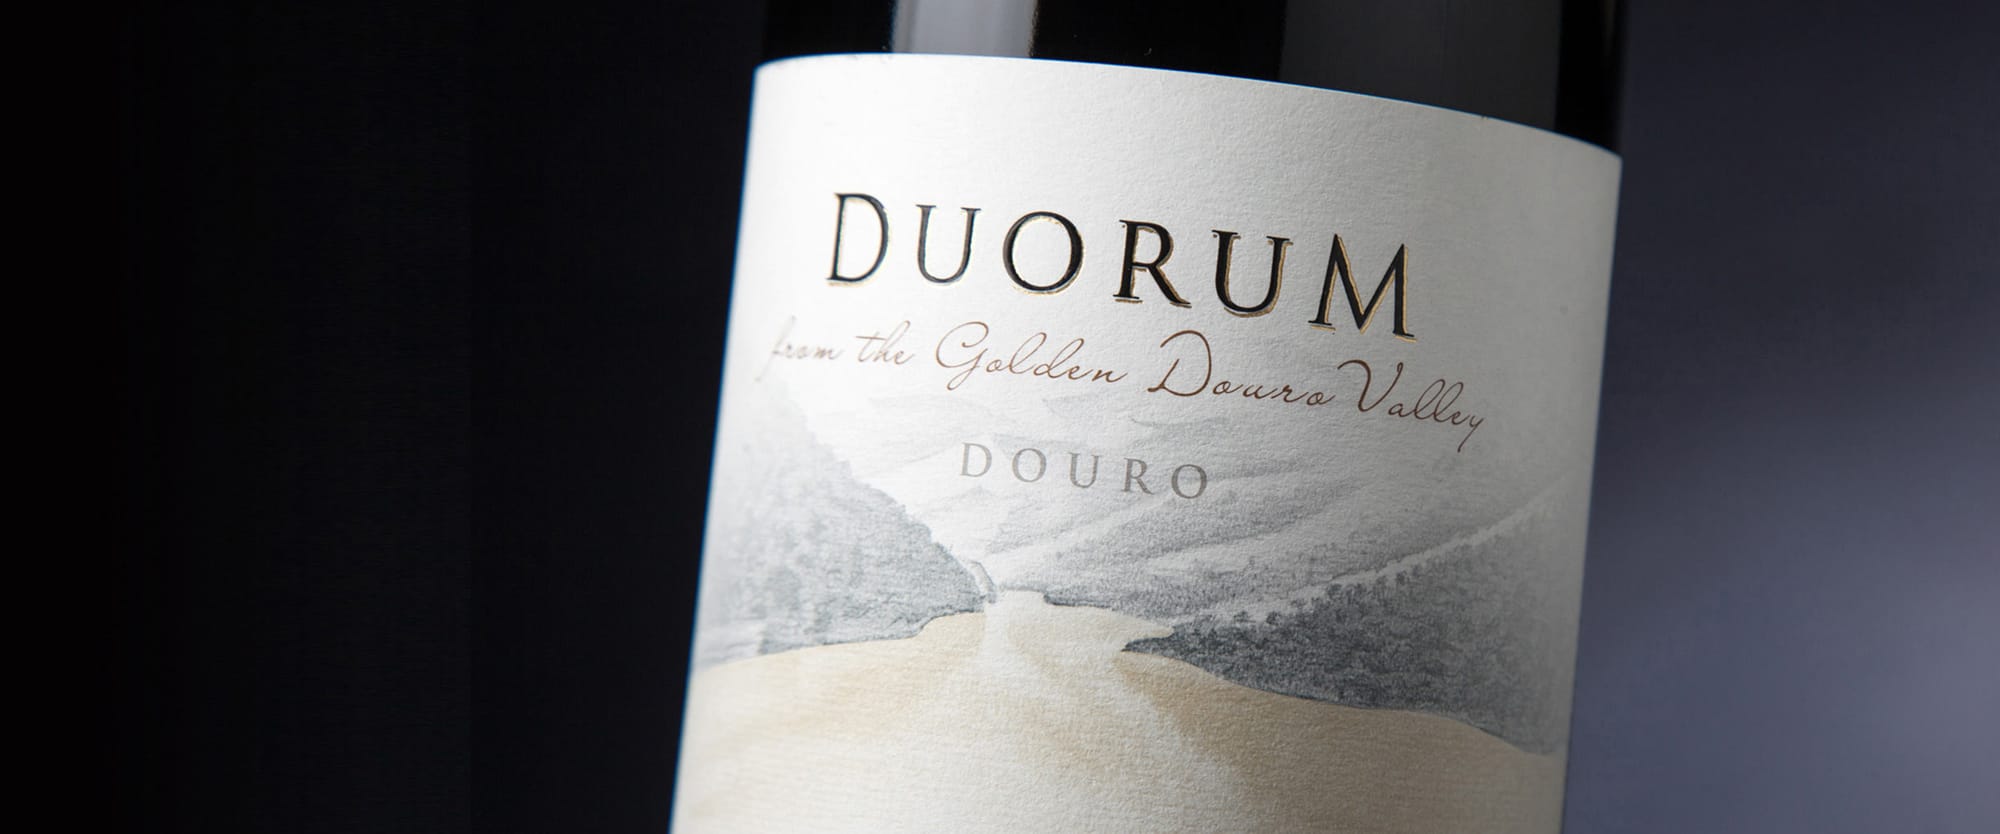 RitaRivotti Designed the Brand and Packaging Design For Duorum Wines